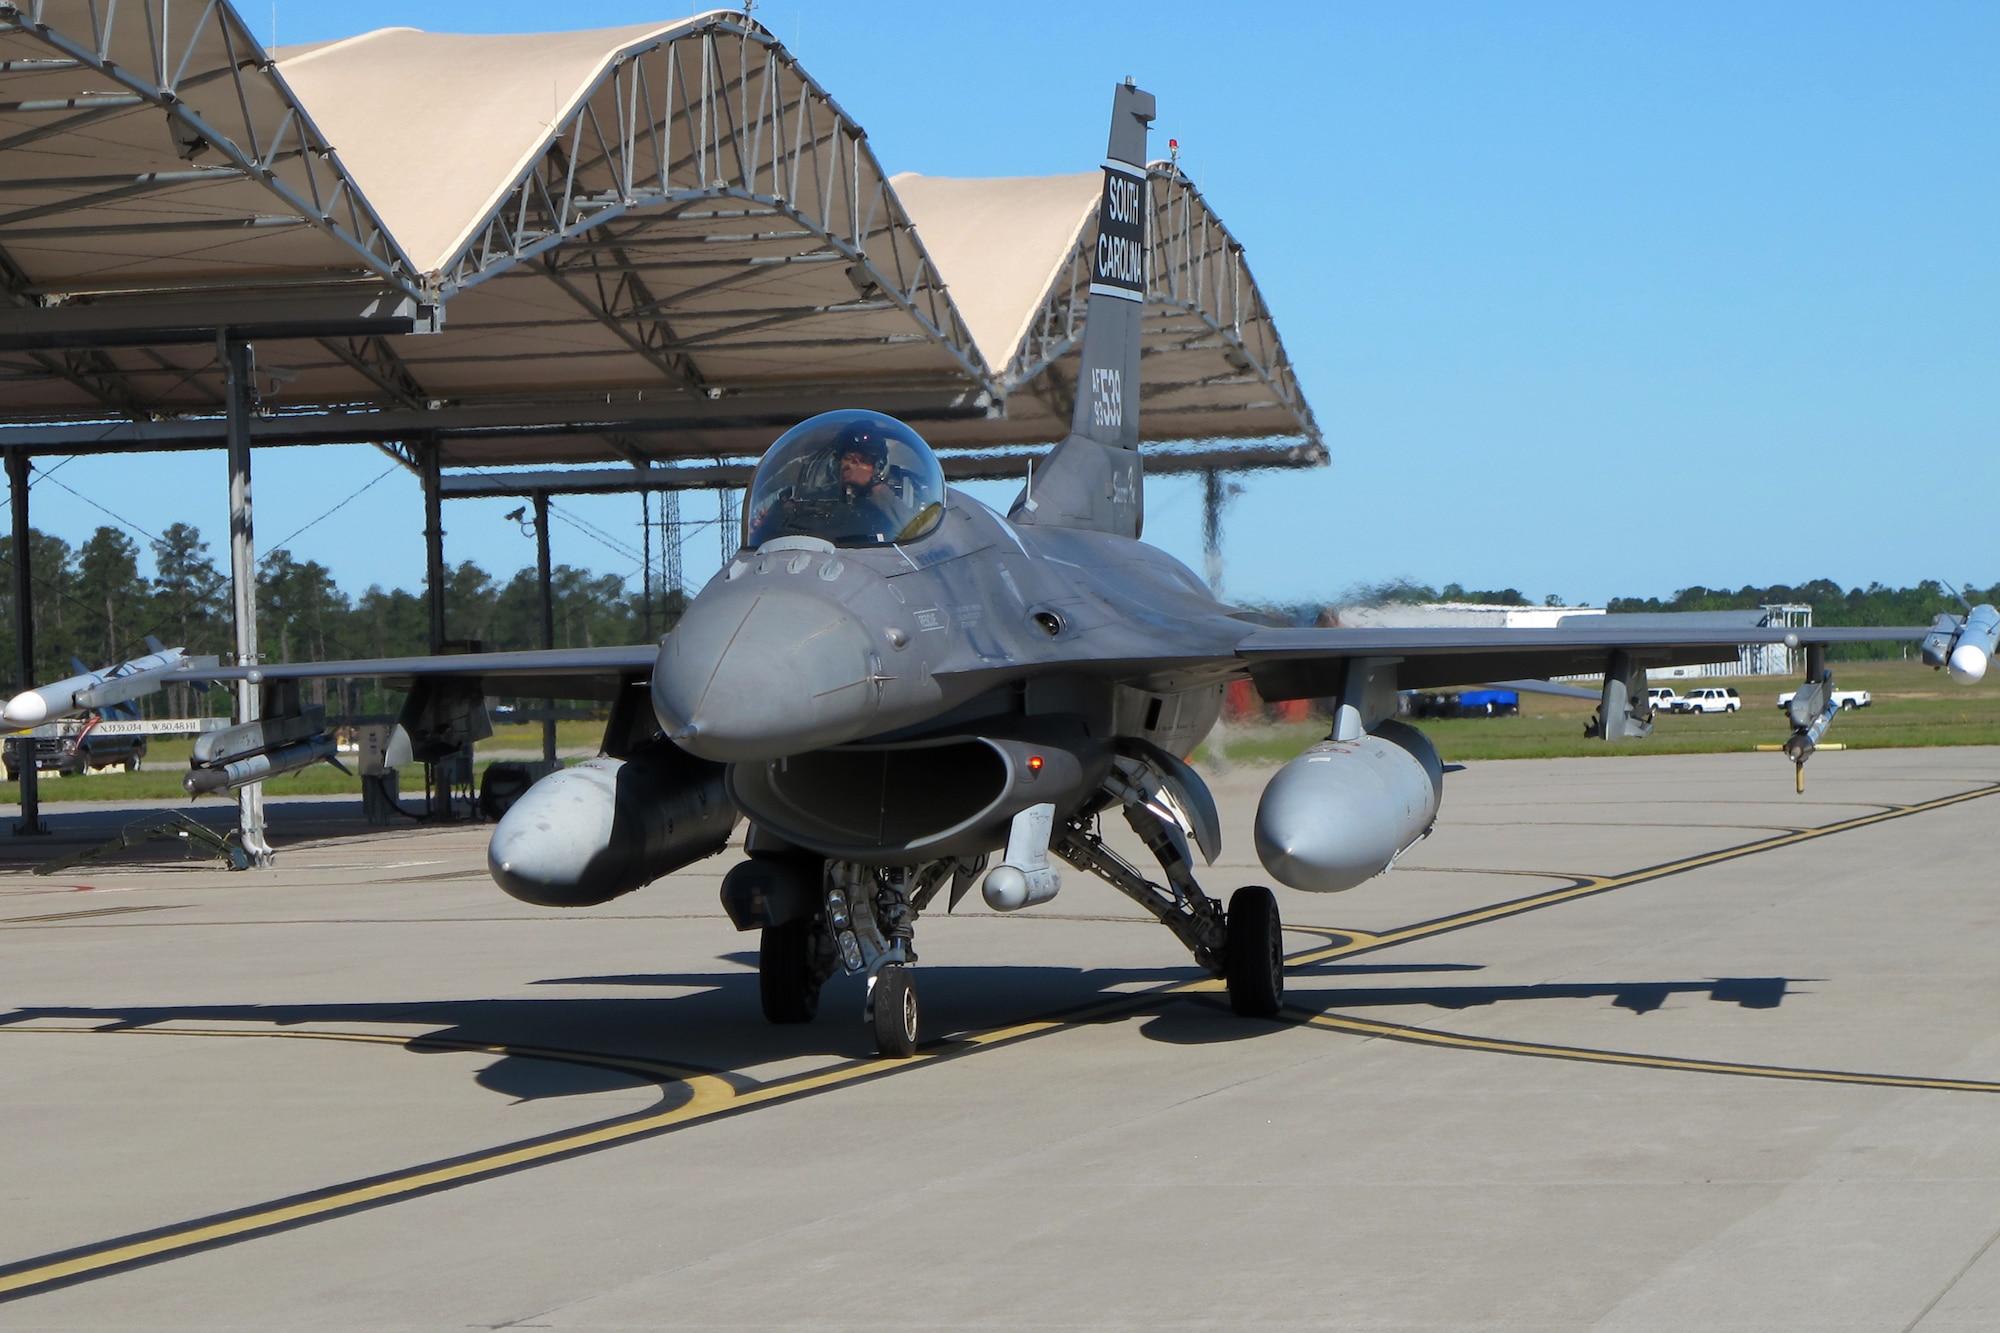 An F-16 fighter jet taxis under a blue sky toward the runway for takeoff.